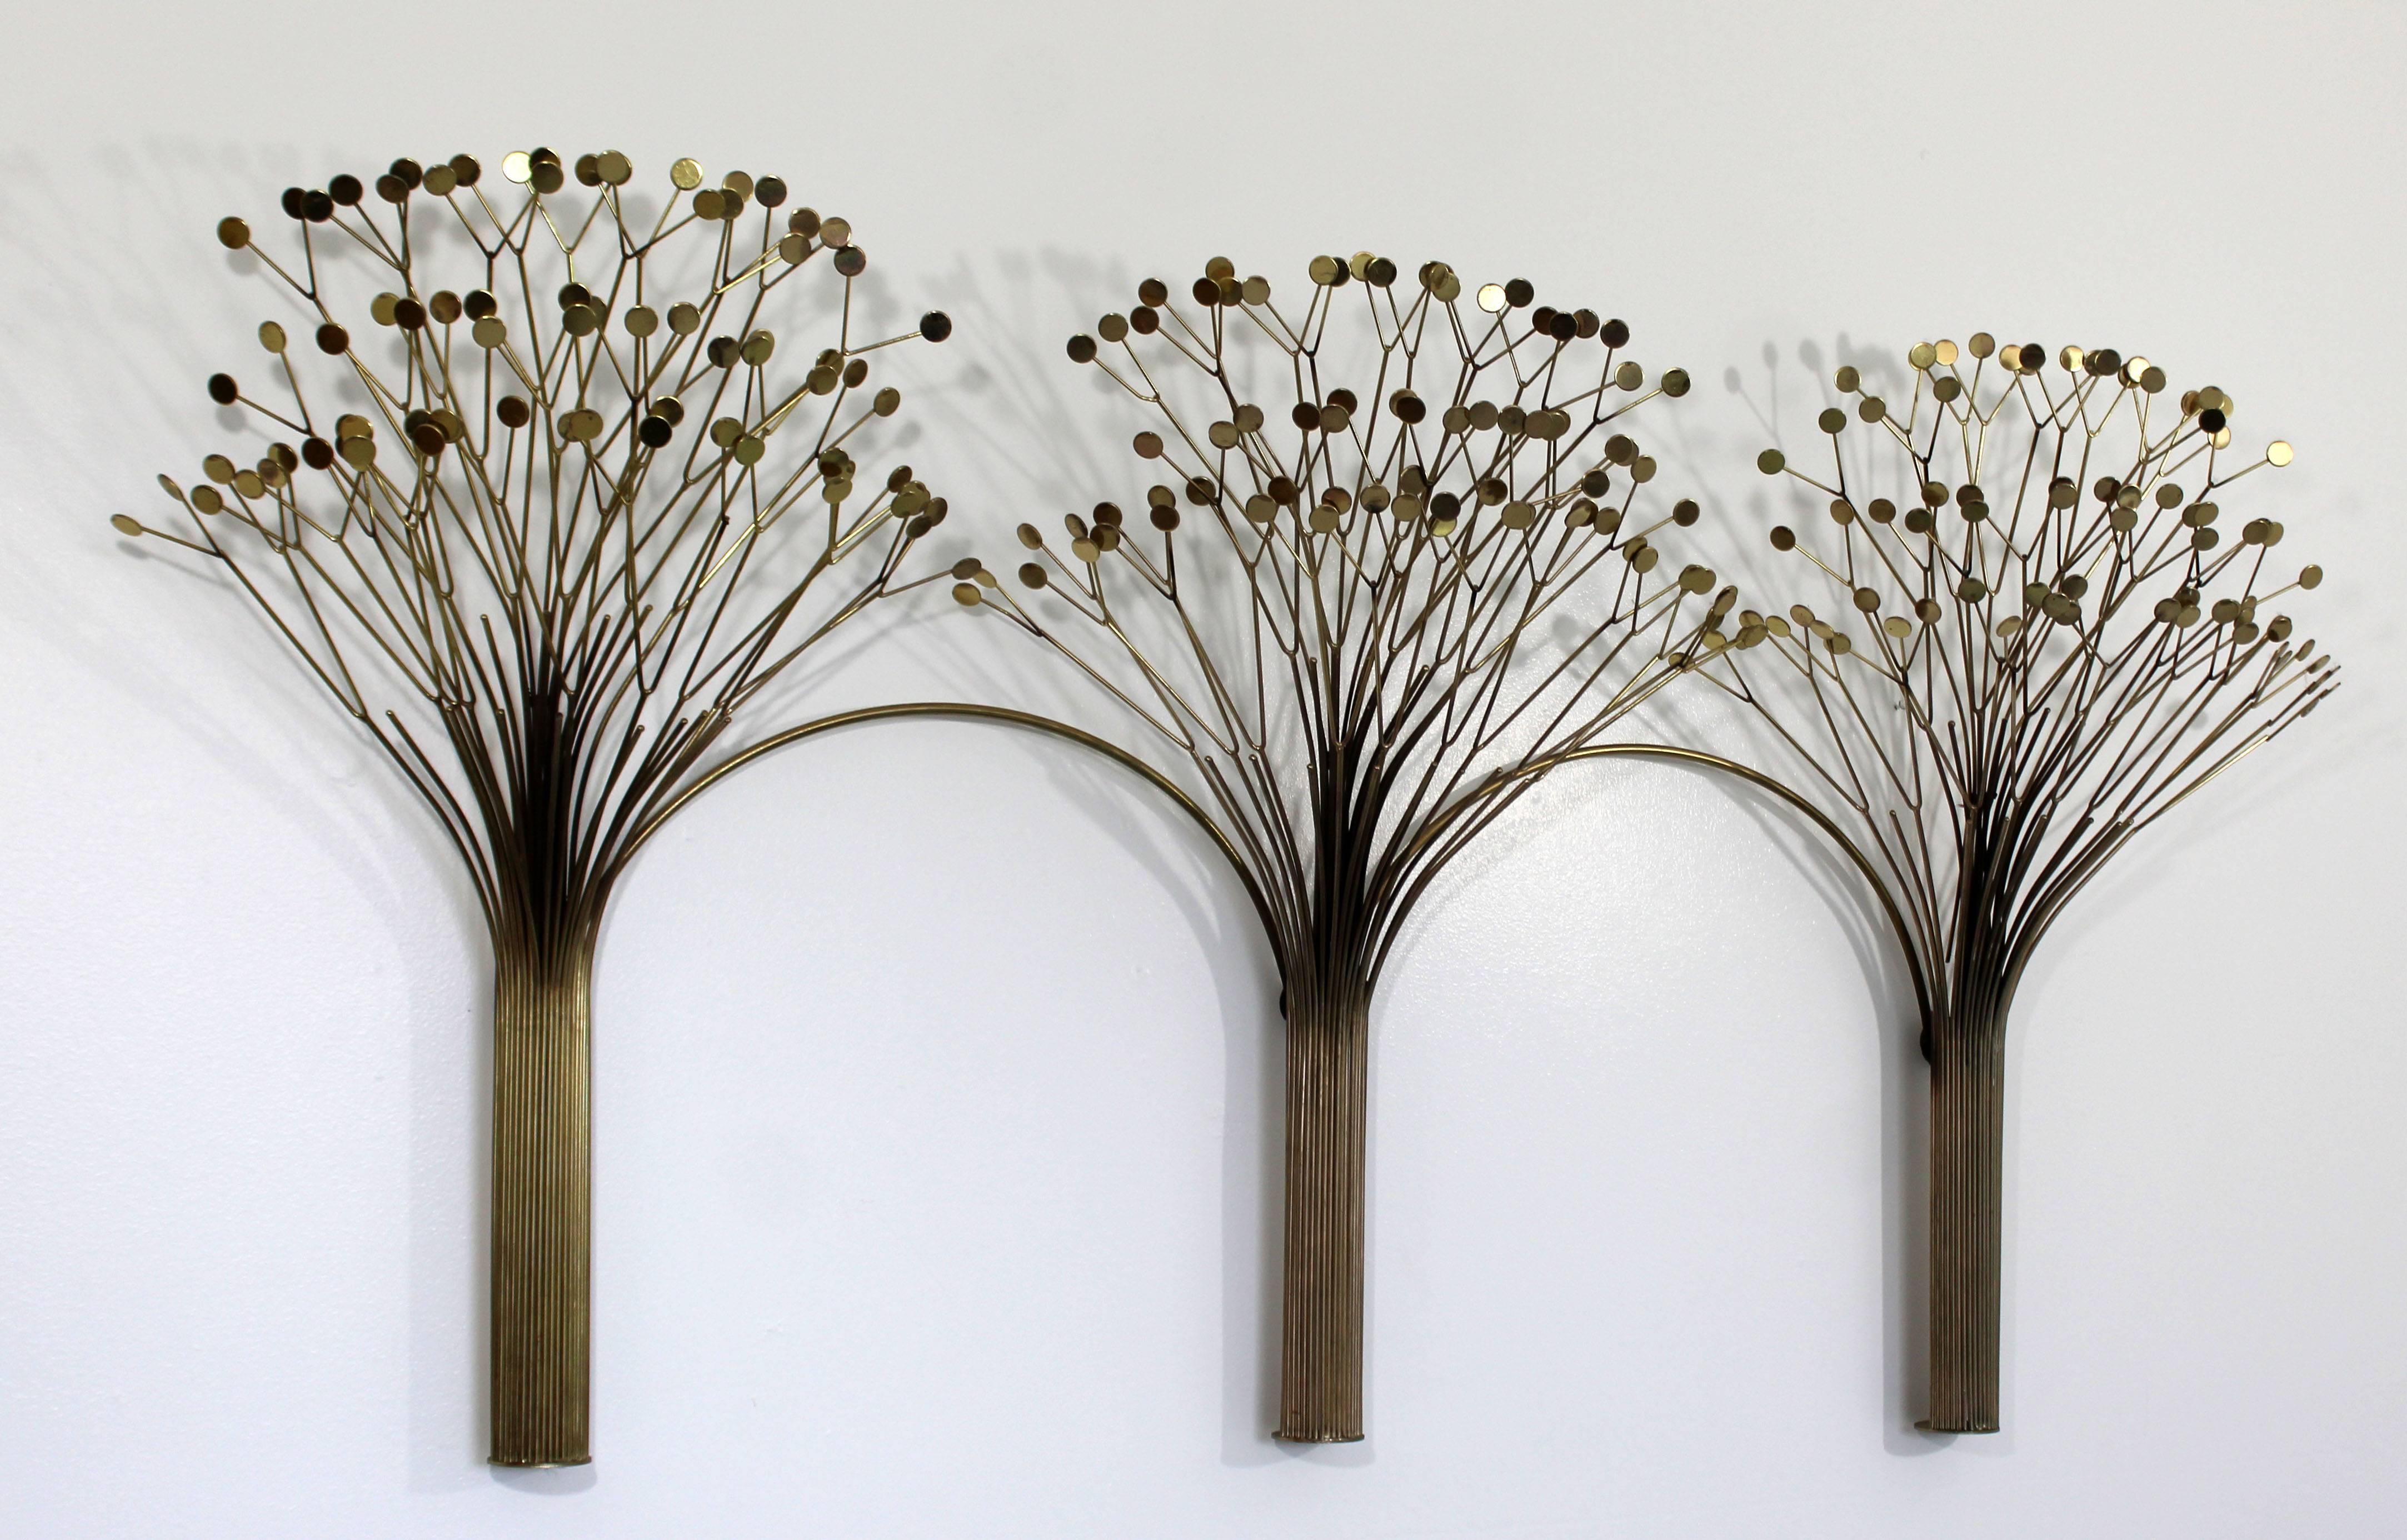 For your consideration is a spectacular, brass wall sculpture of three trees, signed Curtis Jere and dated 1971. In excellent condition. The dimensions are 64